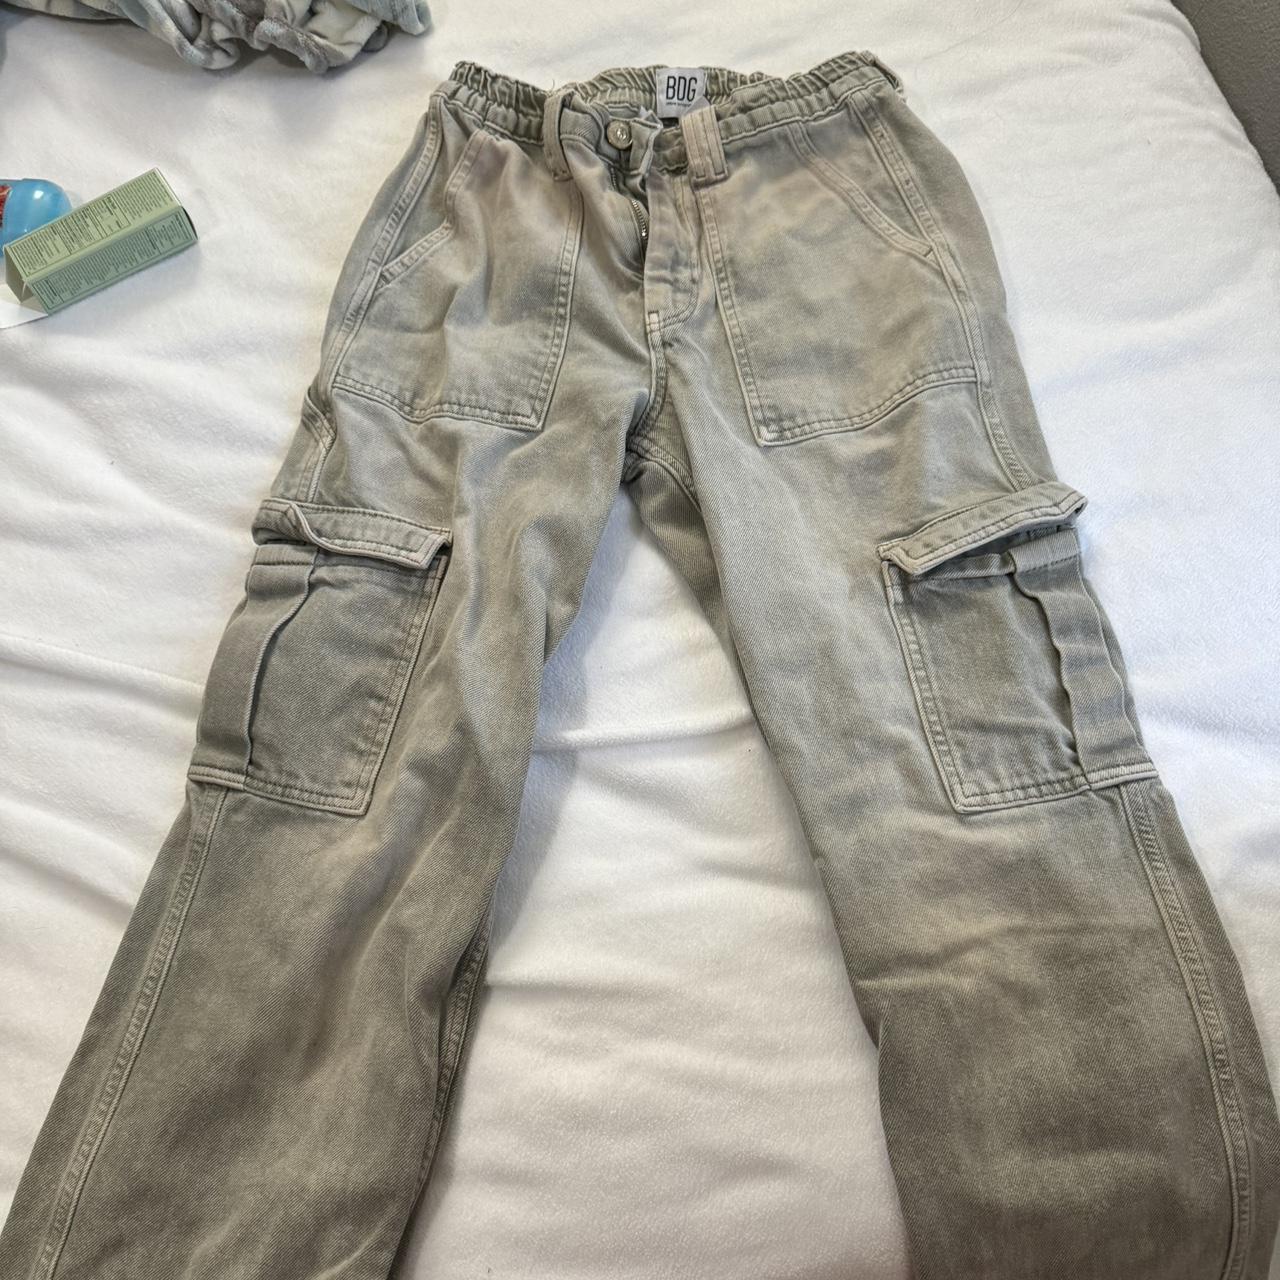 Urban Cargo Pants - used them for work (fast food)... - Depop